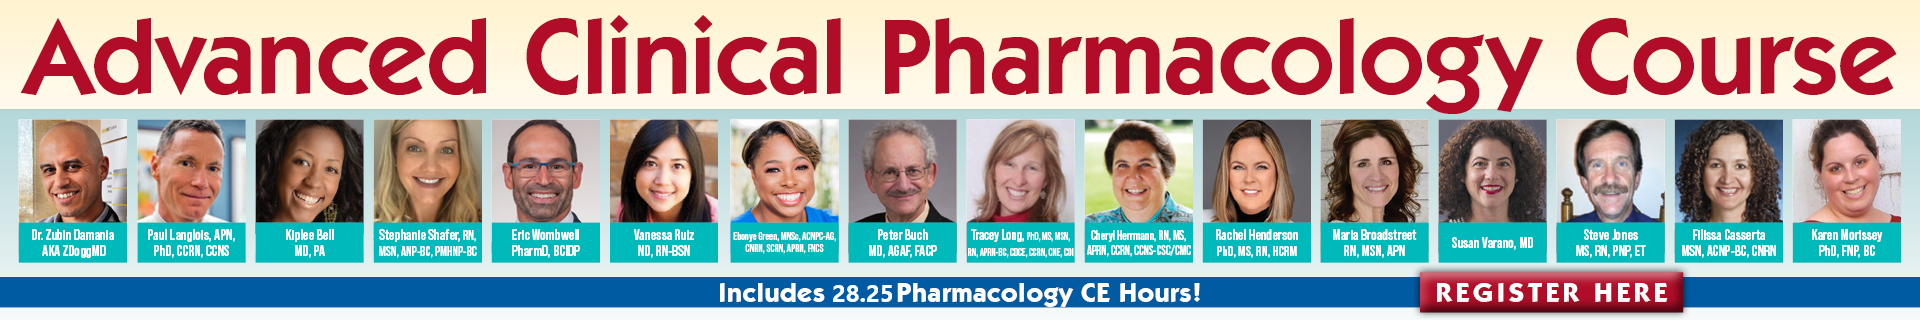 Advanced Clinical Pharmacology Course – with 28.25 pharmacology CE Hours